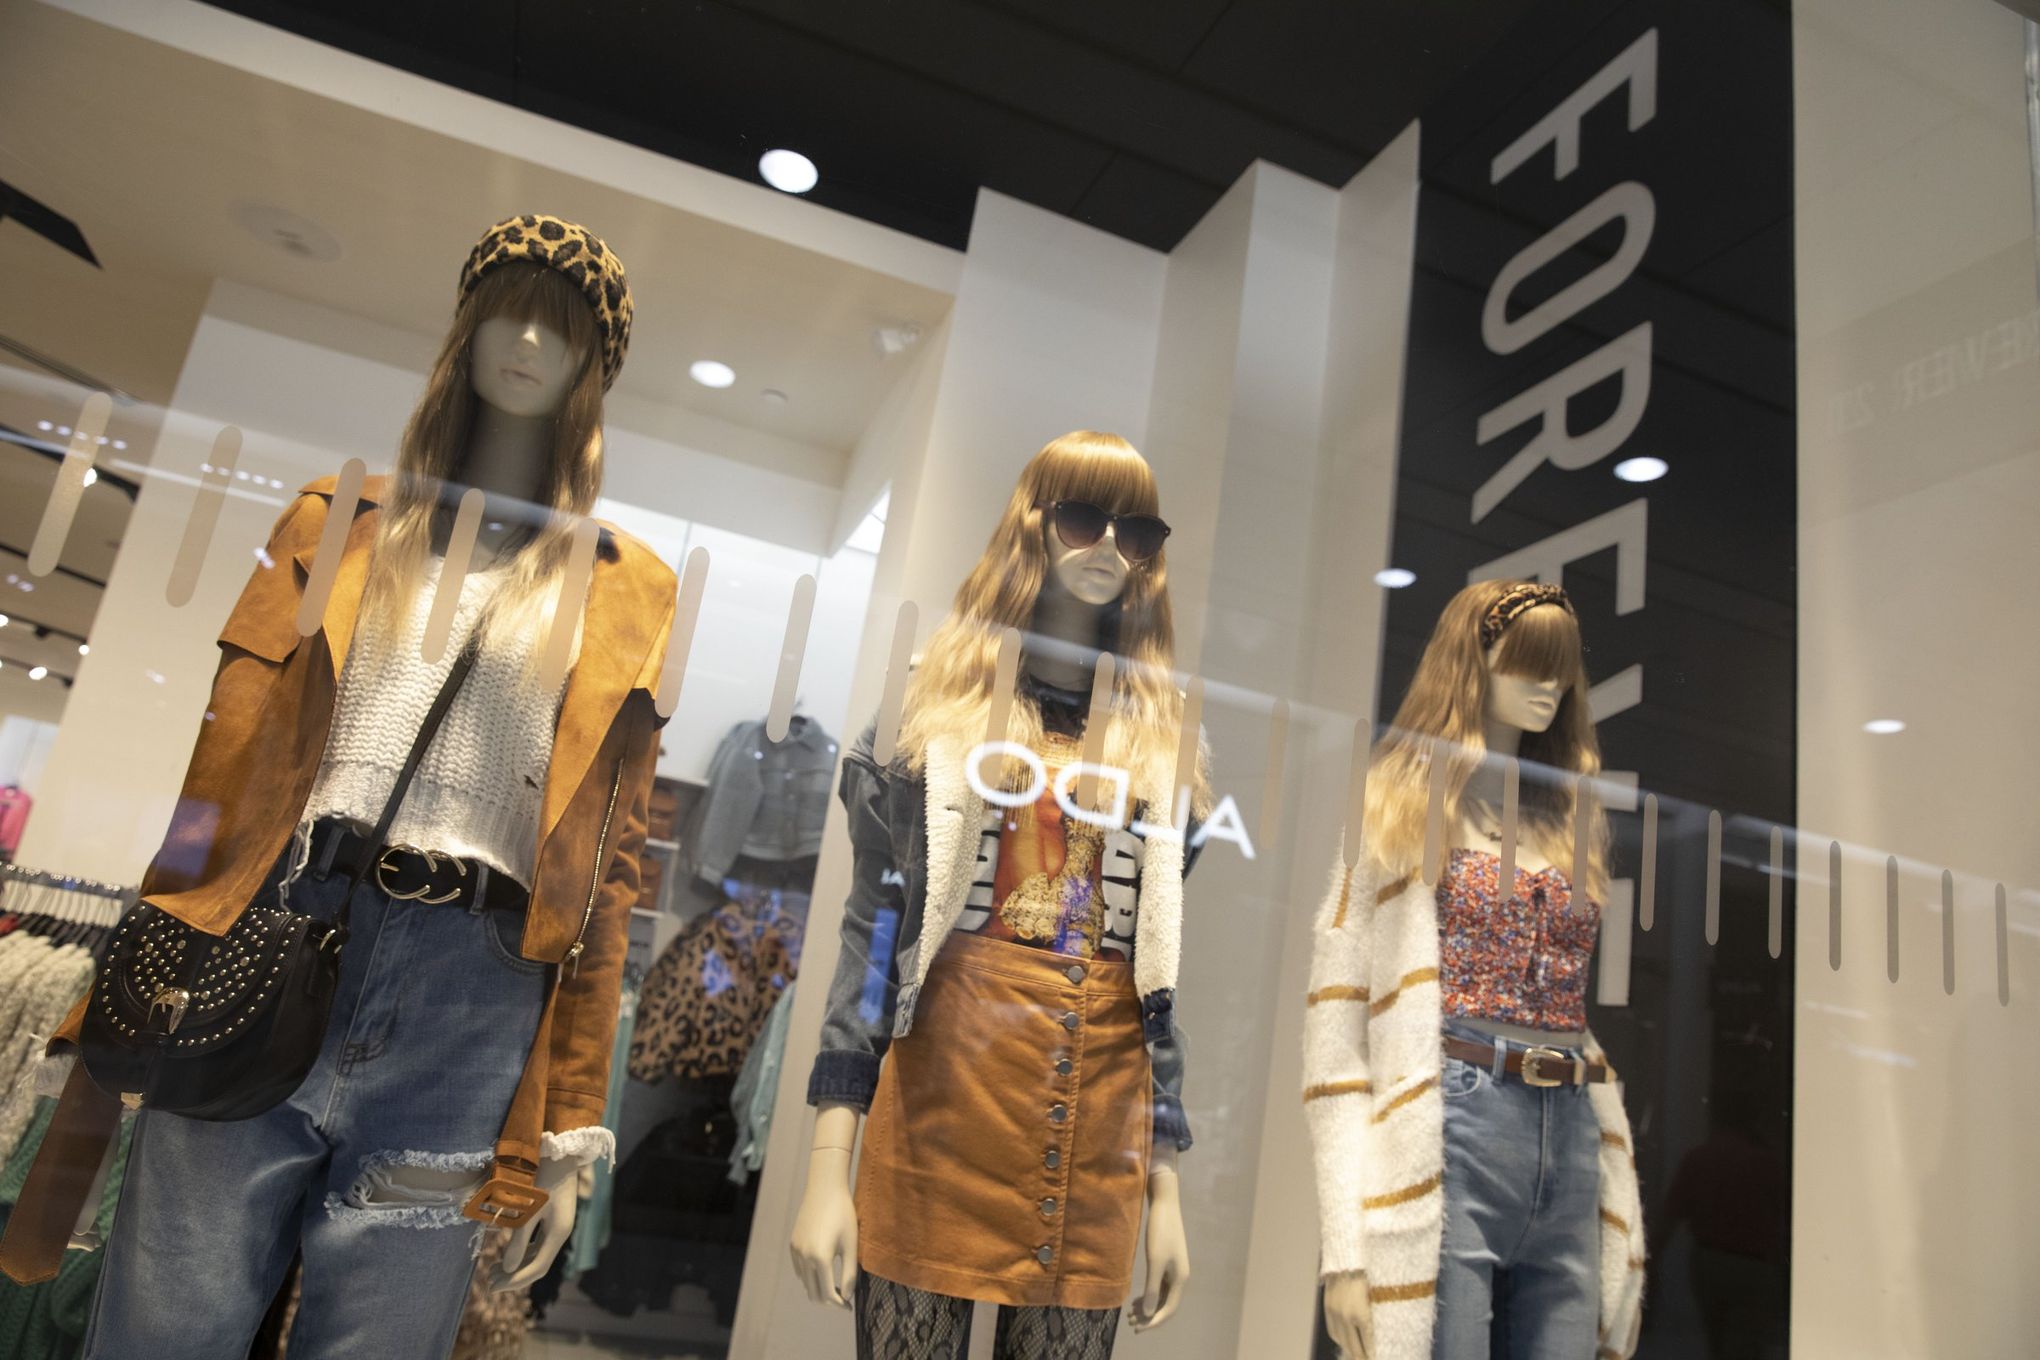 Forever 21 brand to shed image of 'fast fashion' as it returns to Japan